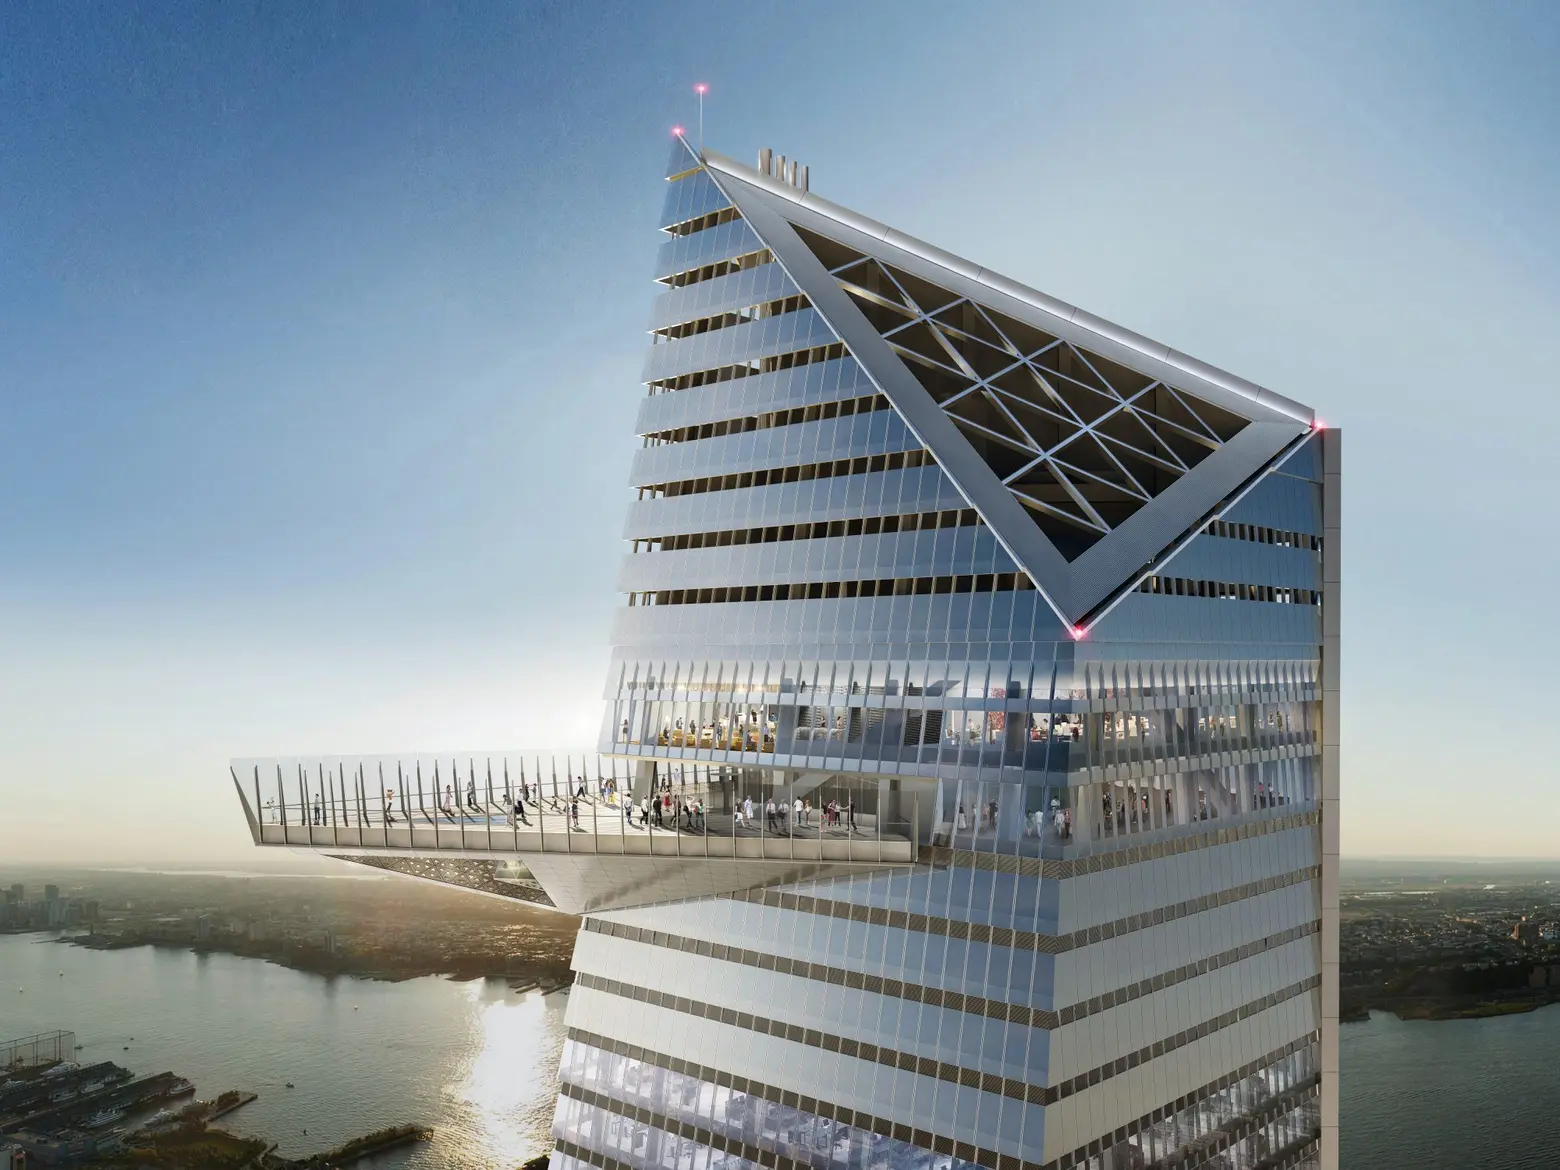 Reserve a spot to stand 1,100 feet on the ‘Edge’ at Hudson Yards’ observation deck